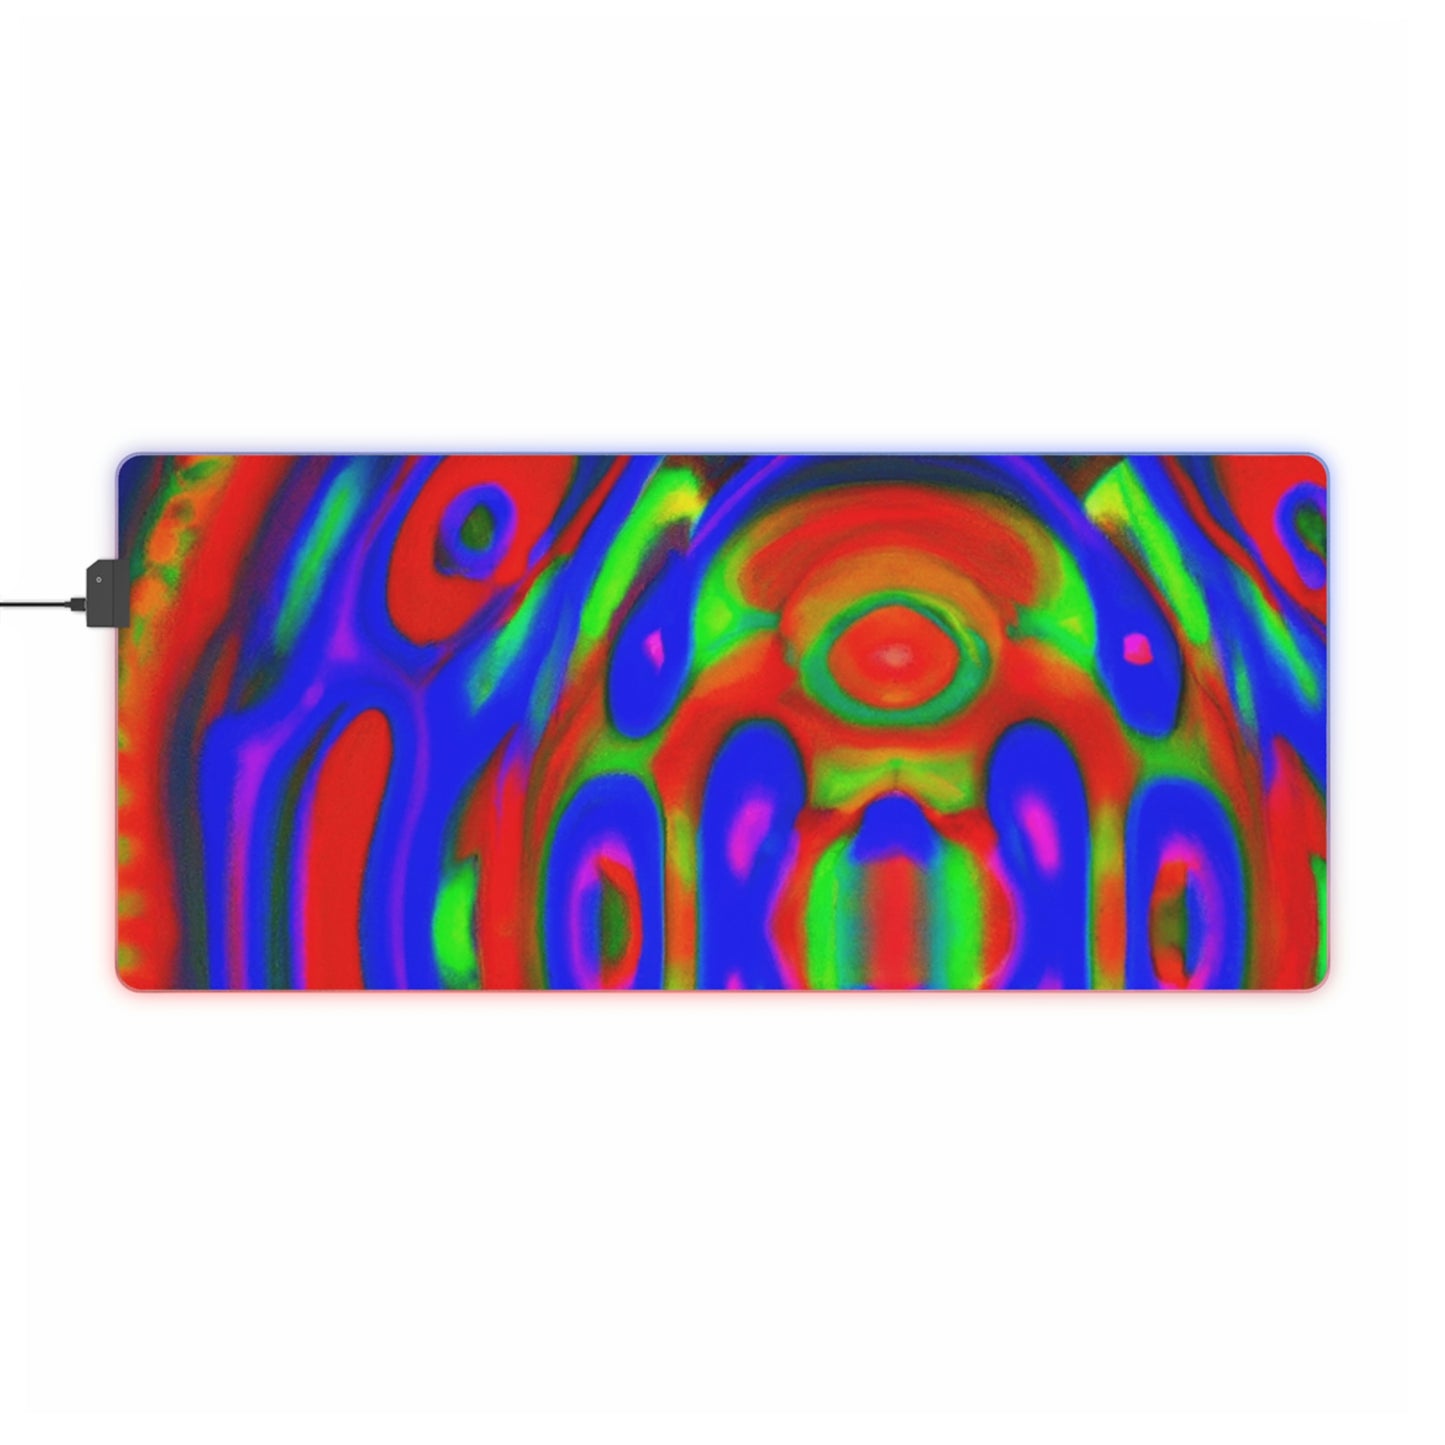 Rocky Ripplewood - Psychedelic Trippy LED Light Up Gaming Mouse Pad